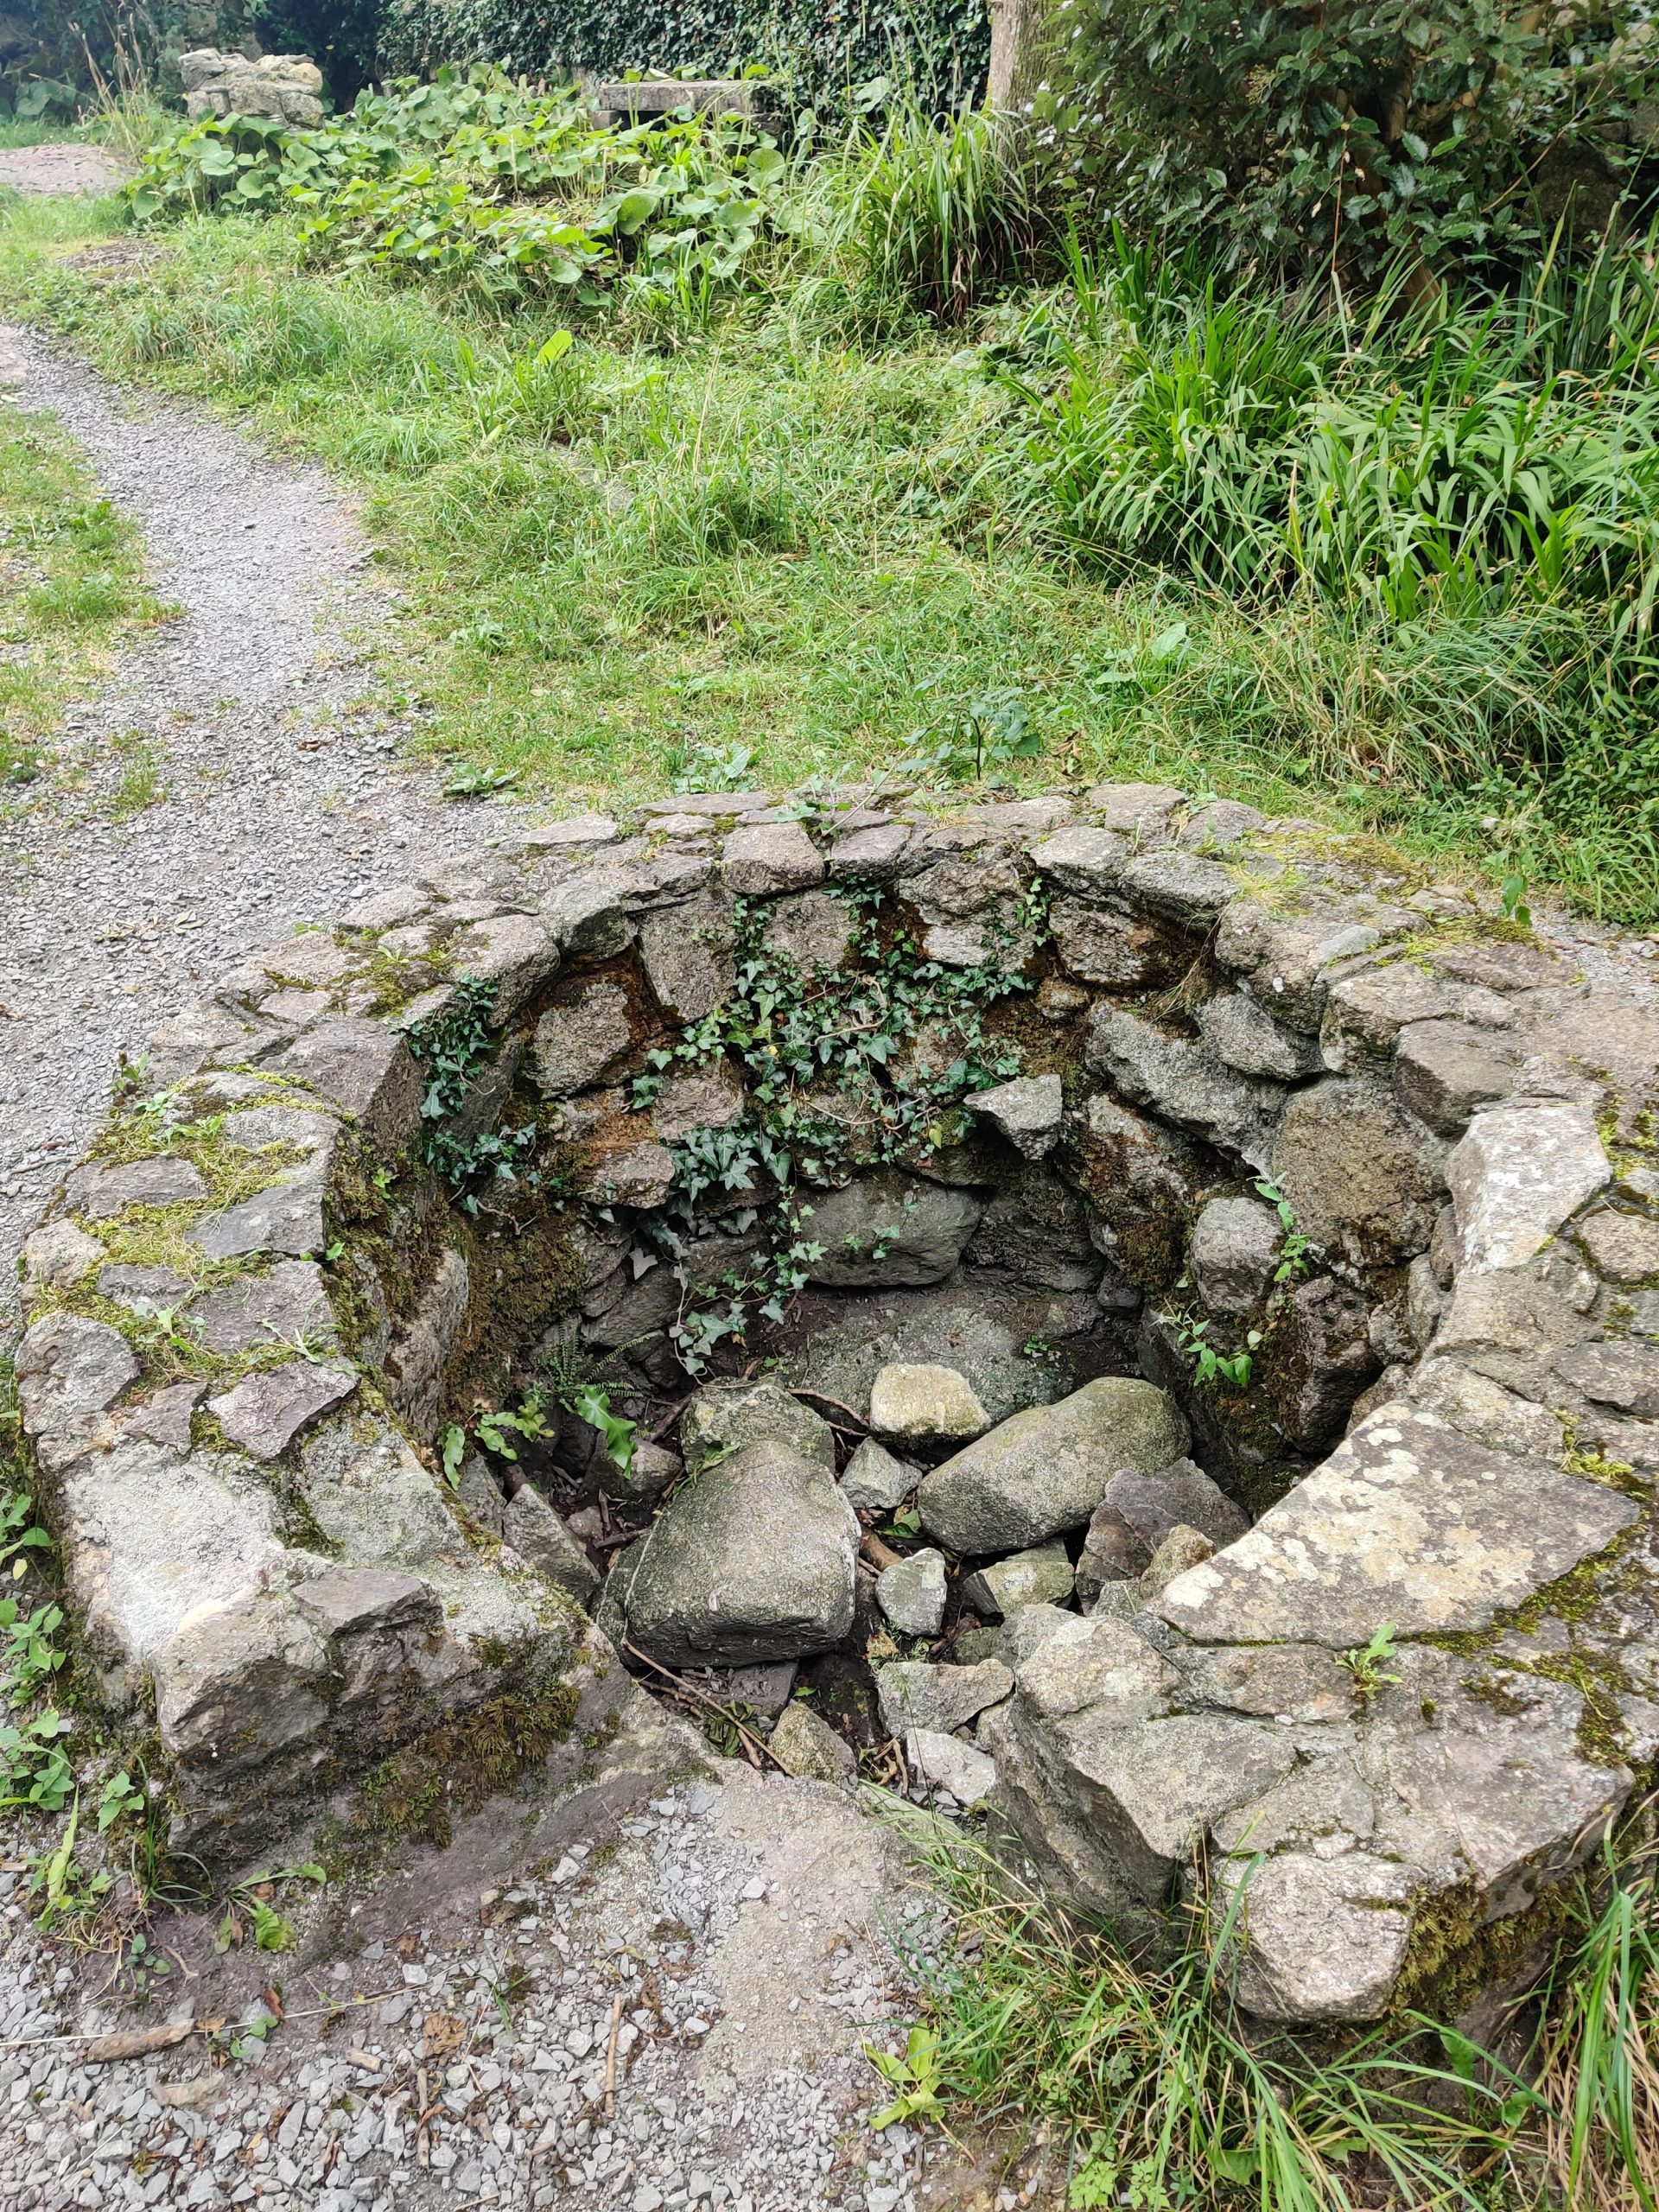 St Enda's Holy Well: The well ran dry - in times of trial or desecration, it is said Holy Wells run dry